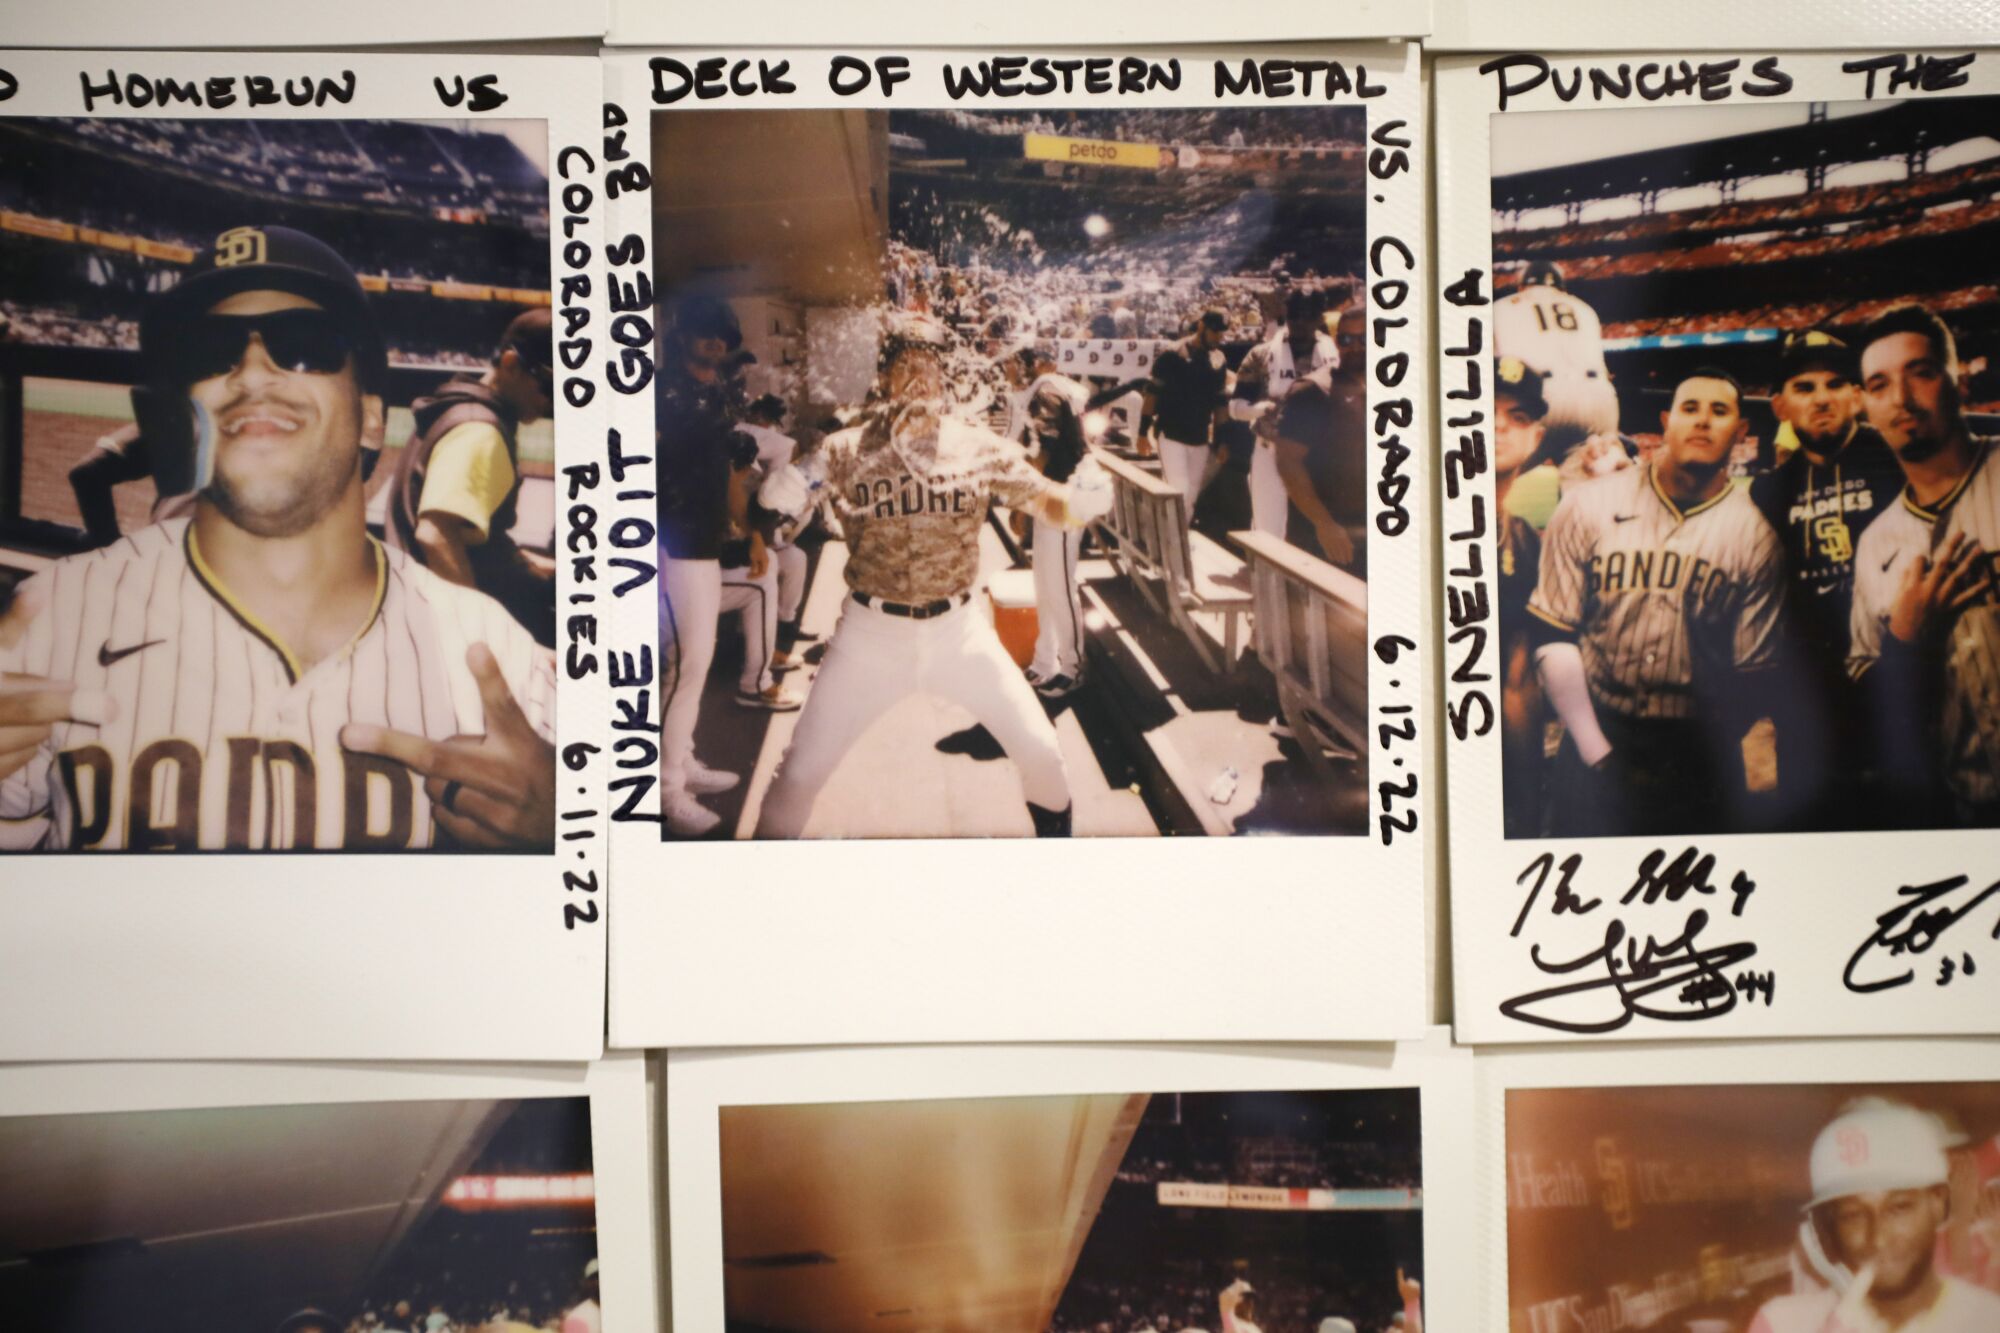 This Polaroid features former Padre Luke Voit after he hit a home run on the third deck of the Western Metal Building.